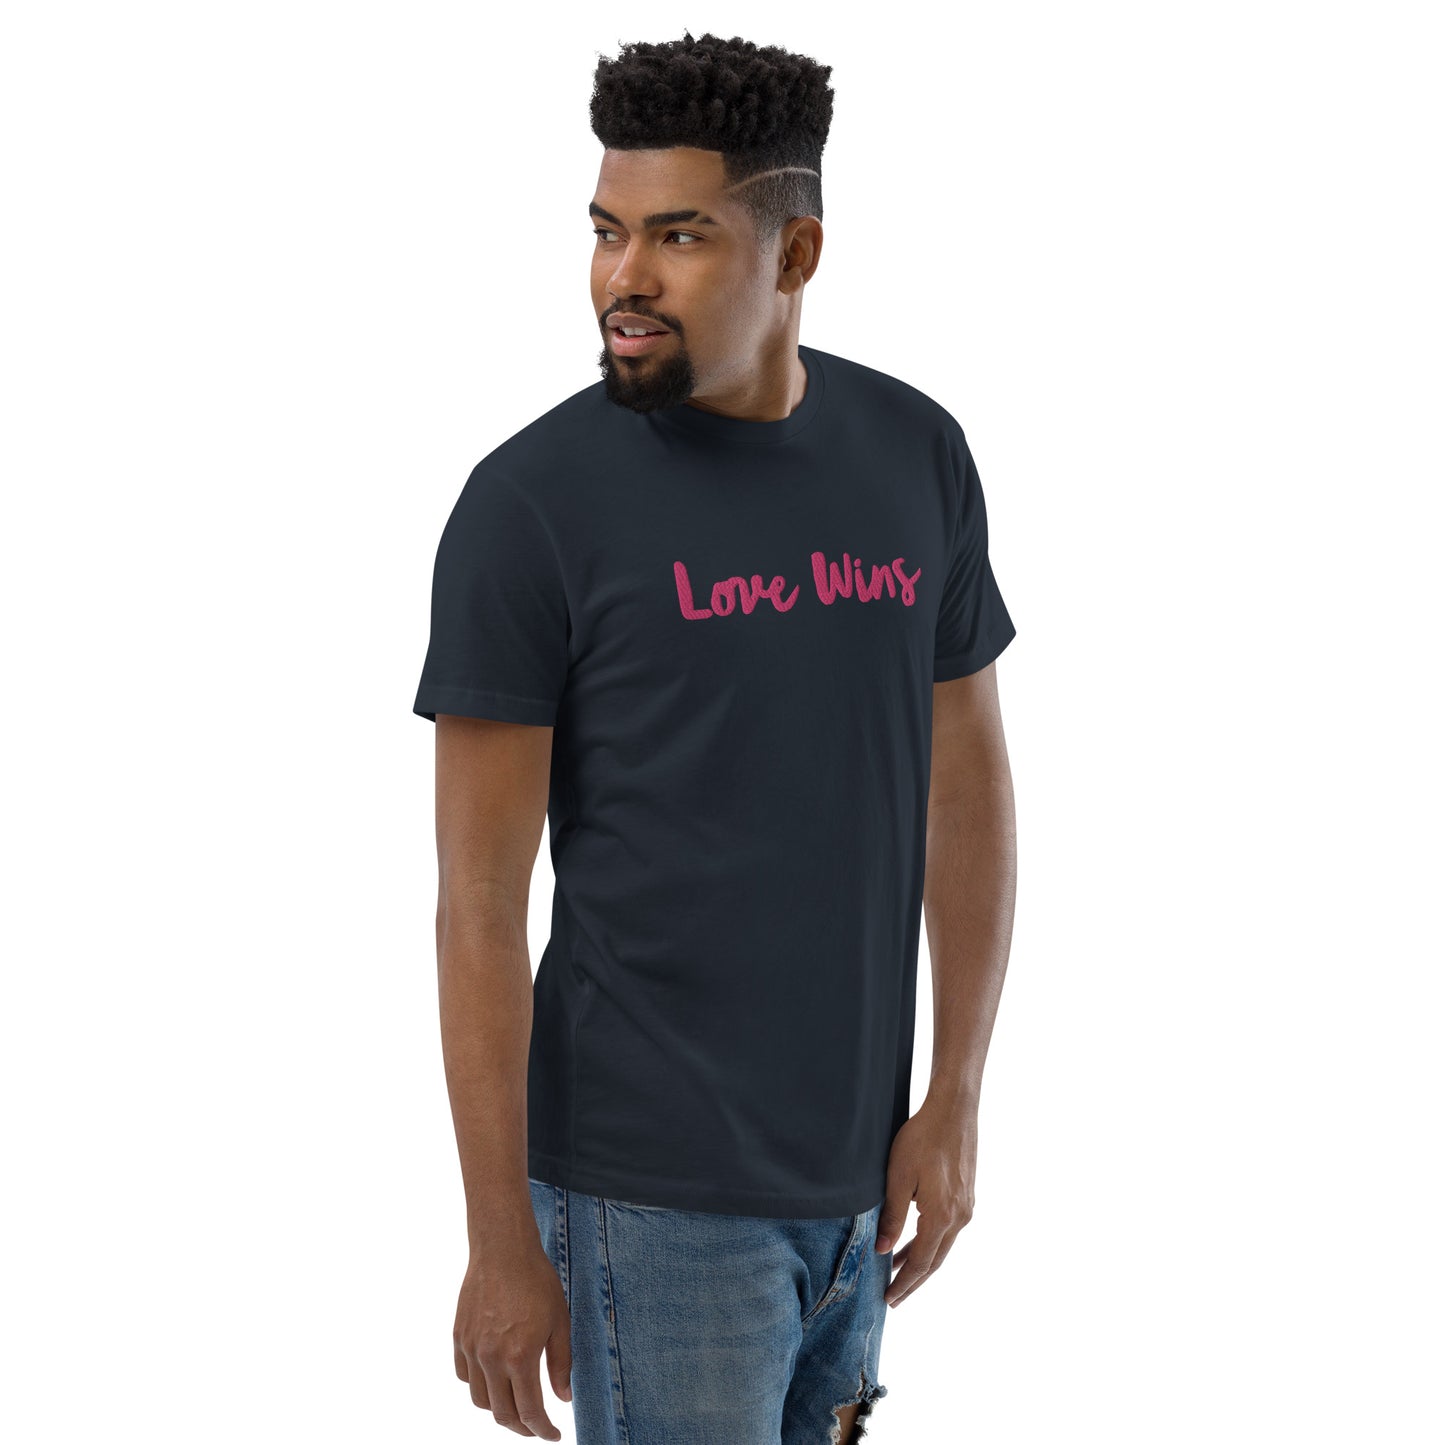 "LOVE WINS" Embroidered T-shirt (Athletic Fit)